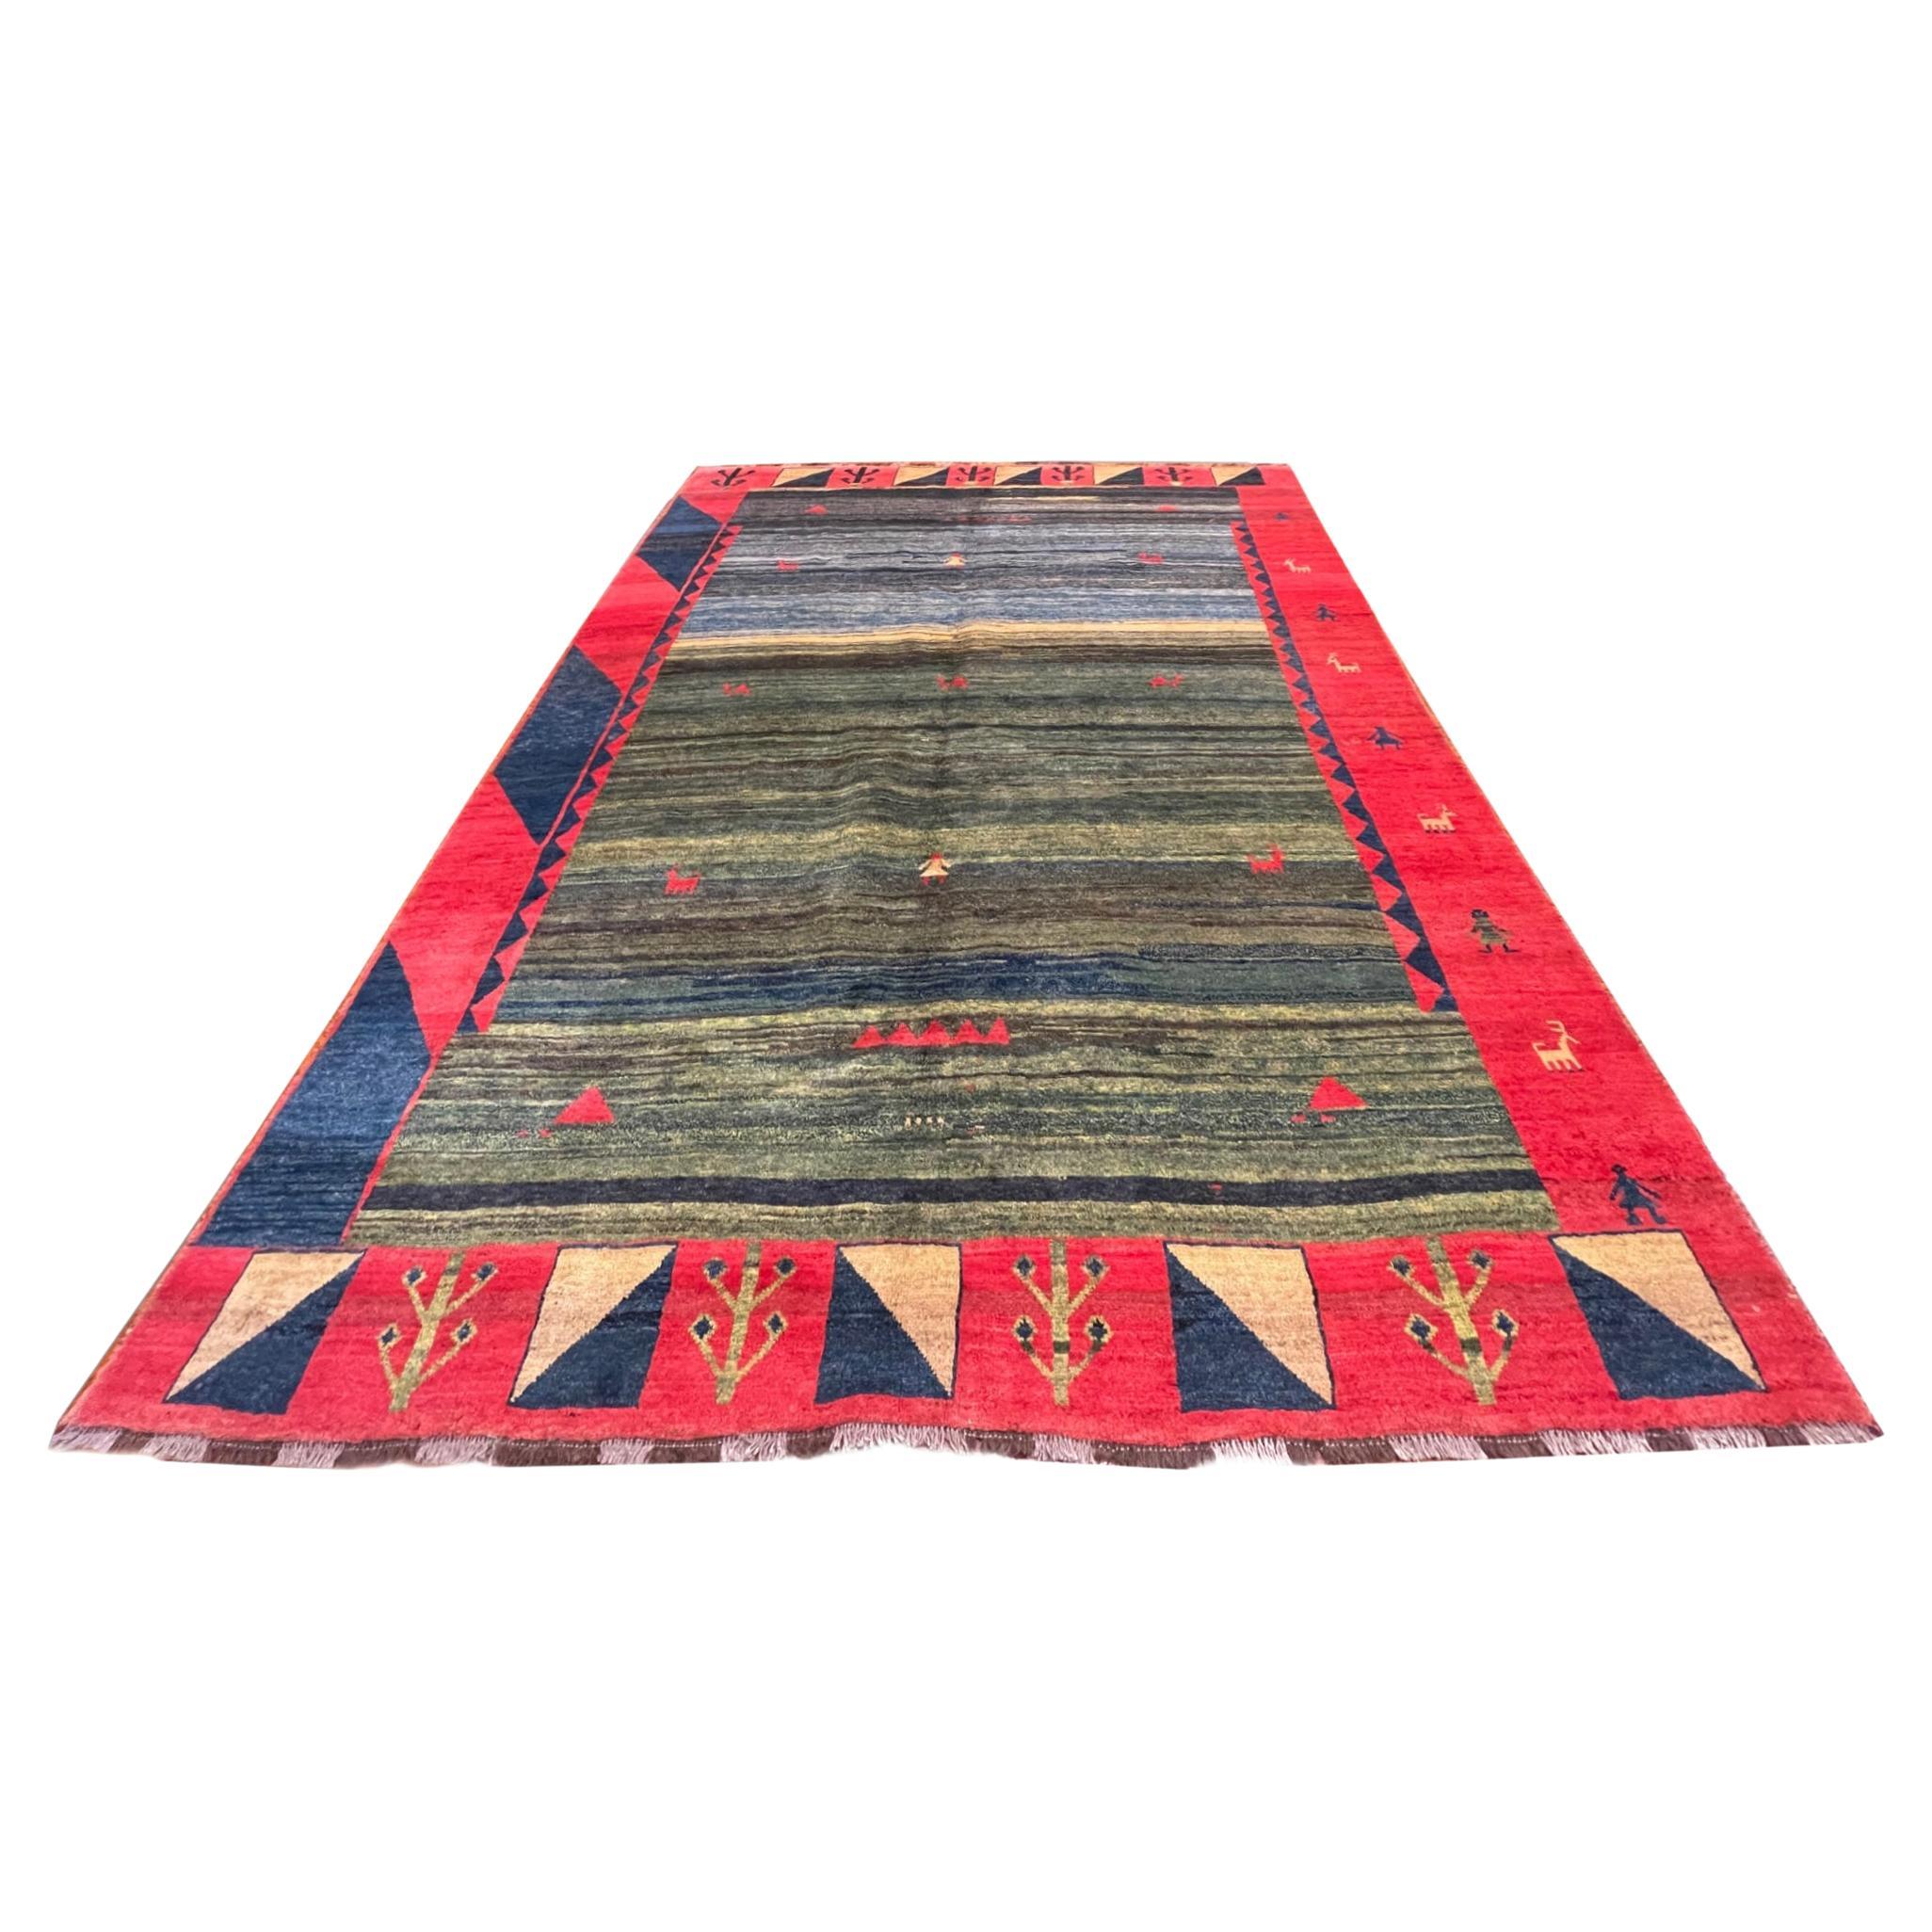  Authentic Persian Shiraz Hand Knotted Tribal Red Blue Green Gabbeh For Sale